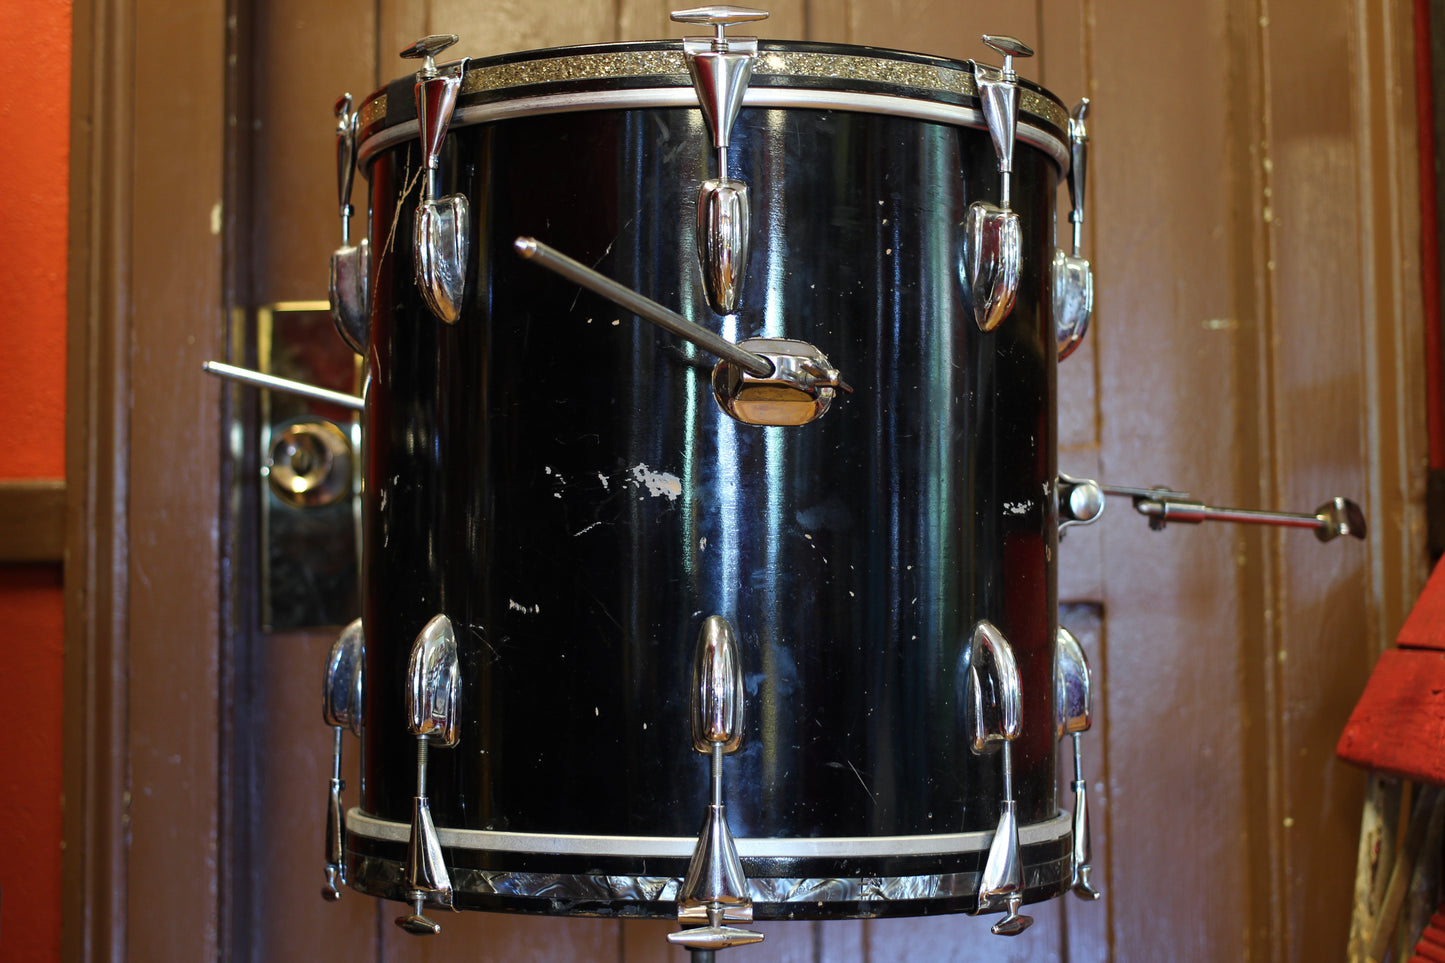 1965 Slingerland 16"x16" Bass Drum in Black Lacquer